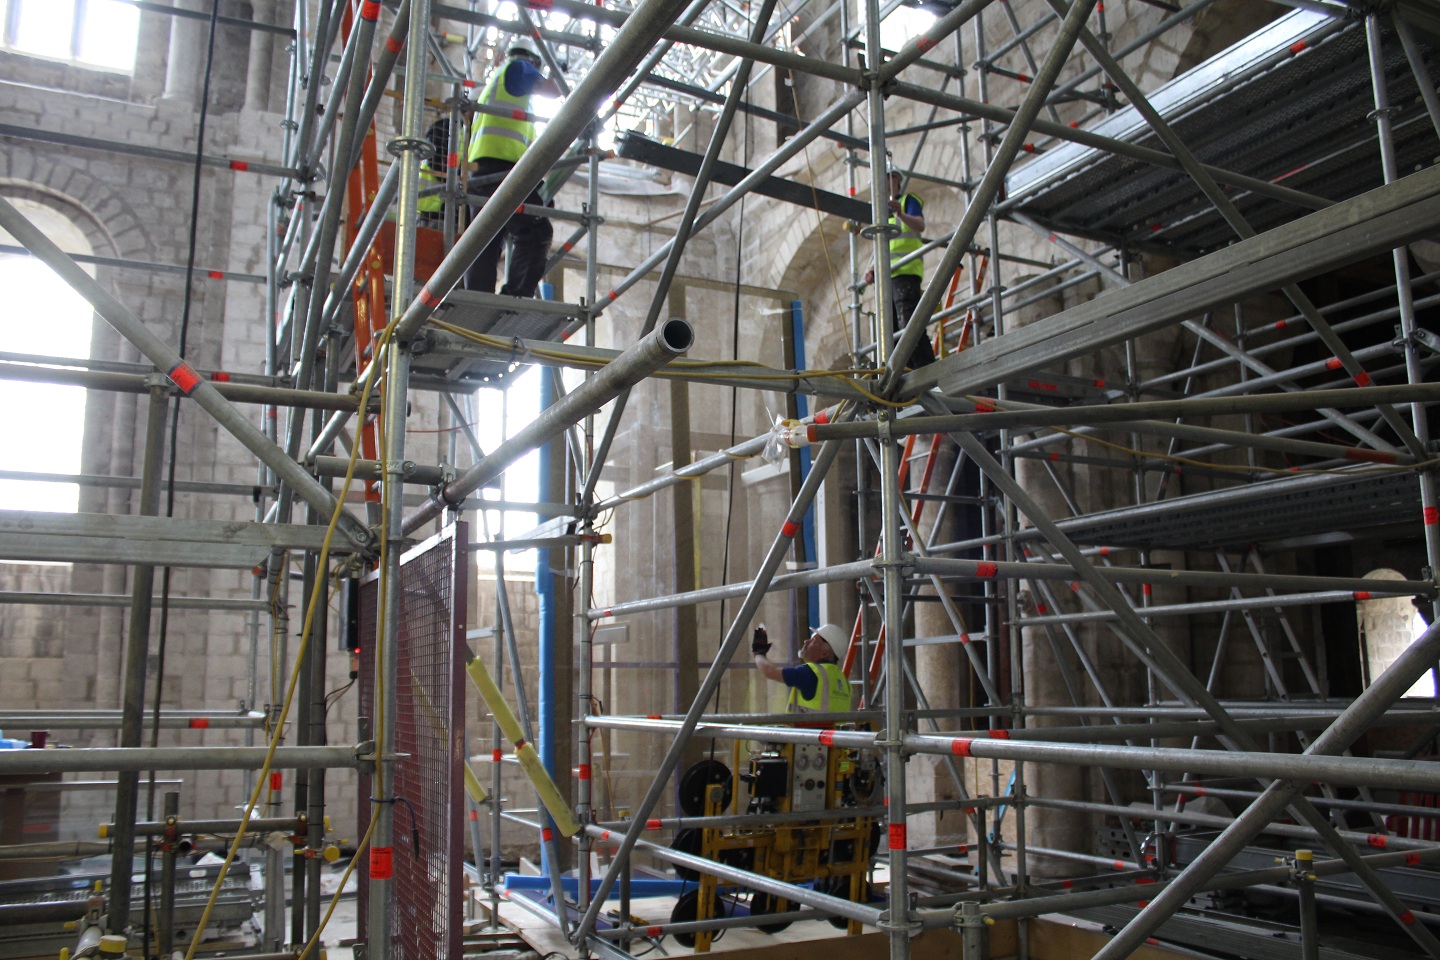 Image showing the extensive scaffolding in the South Transept